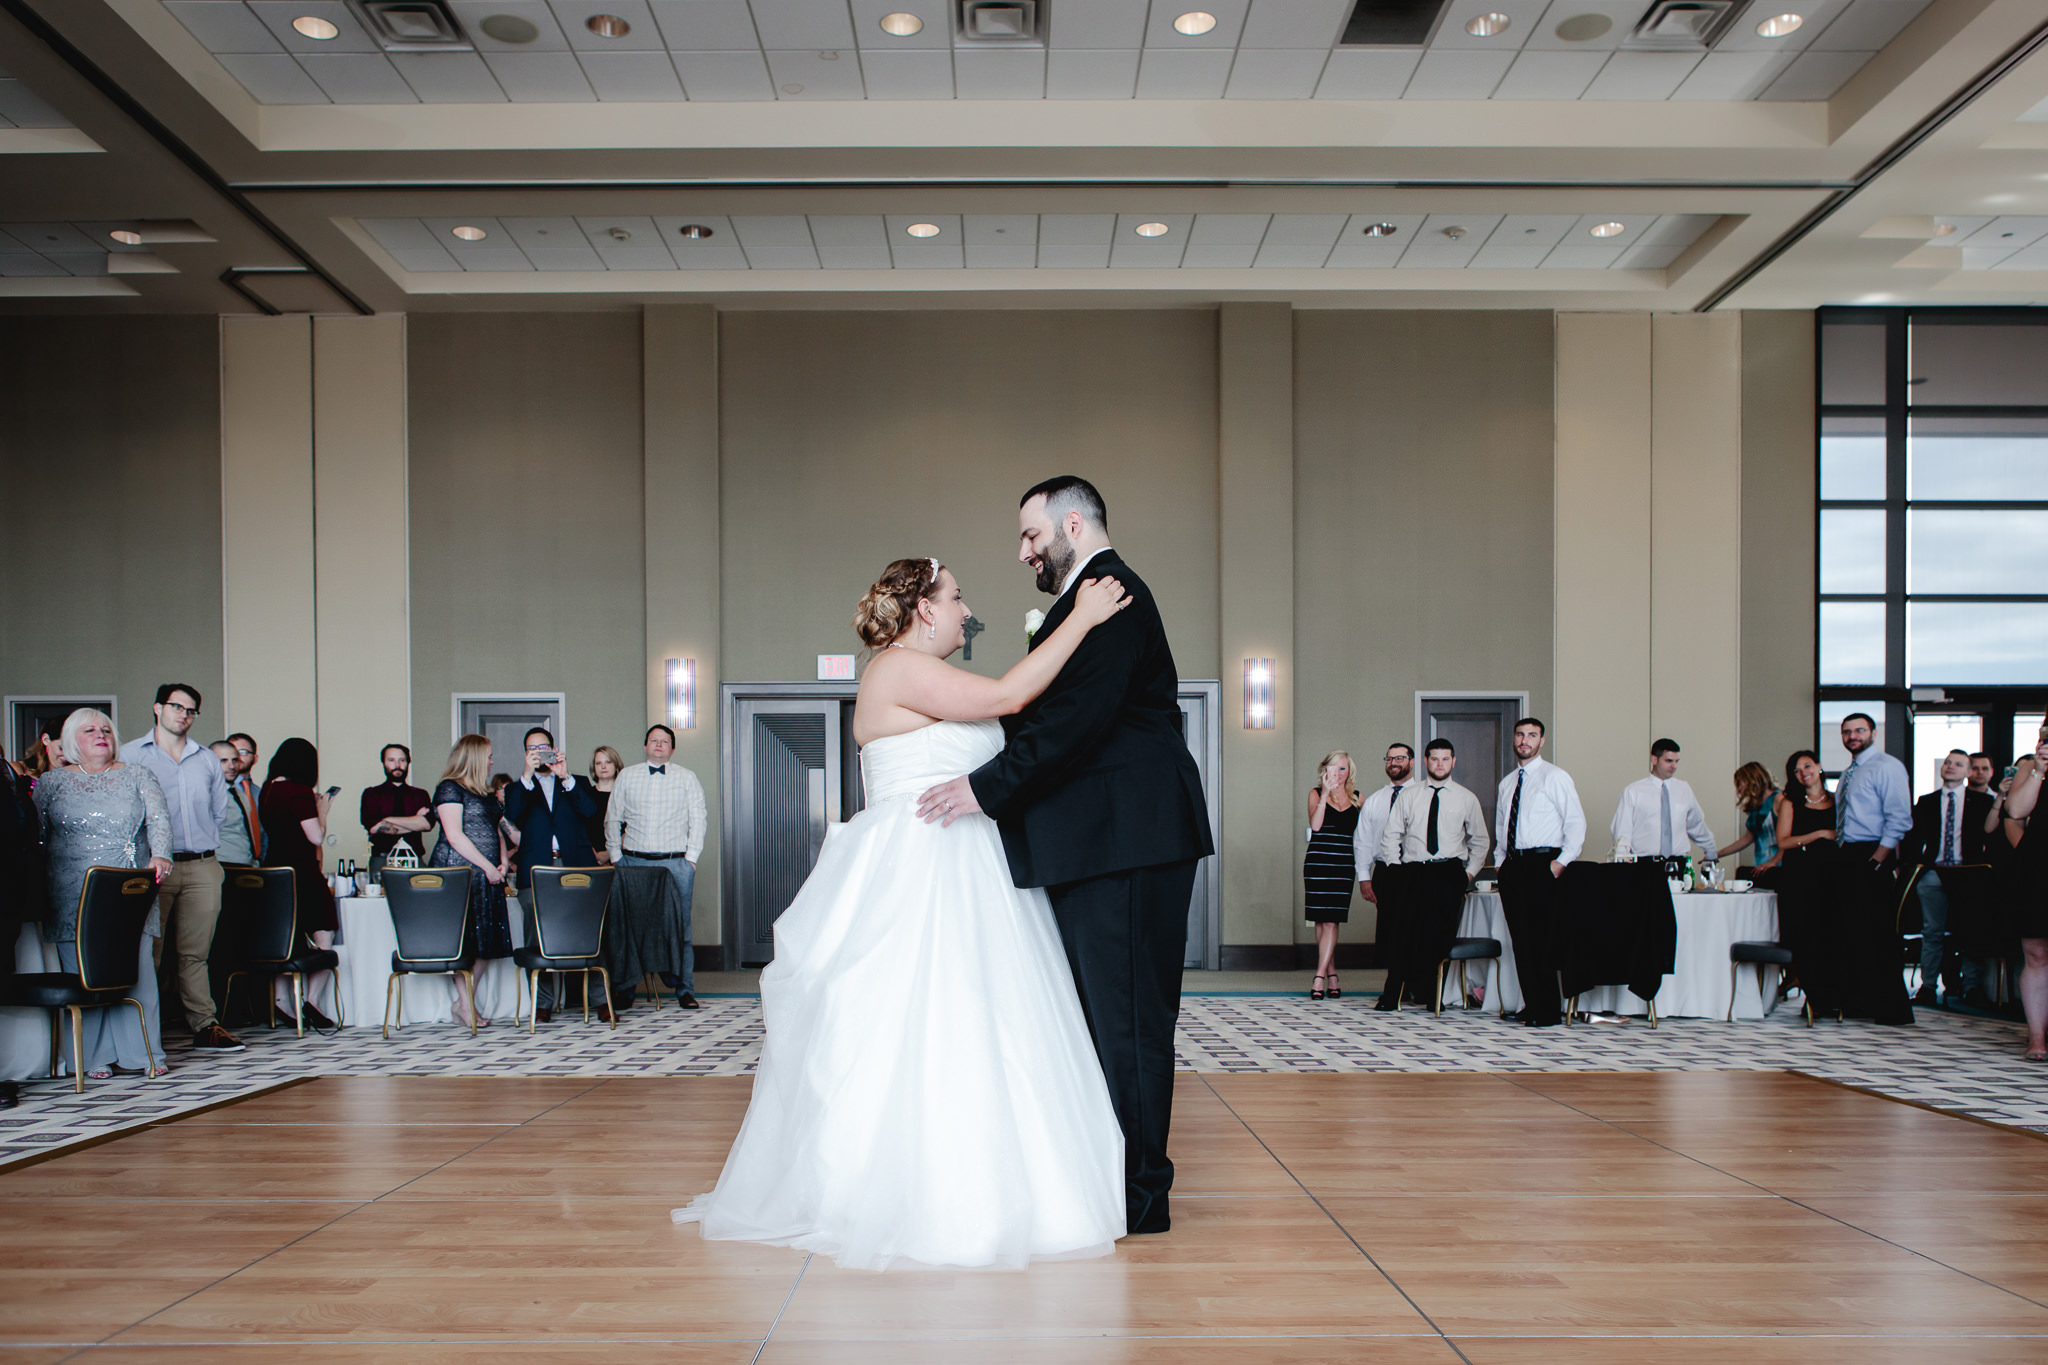 Bride & groom's first dance at Duquesne University